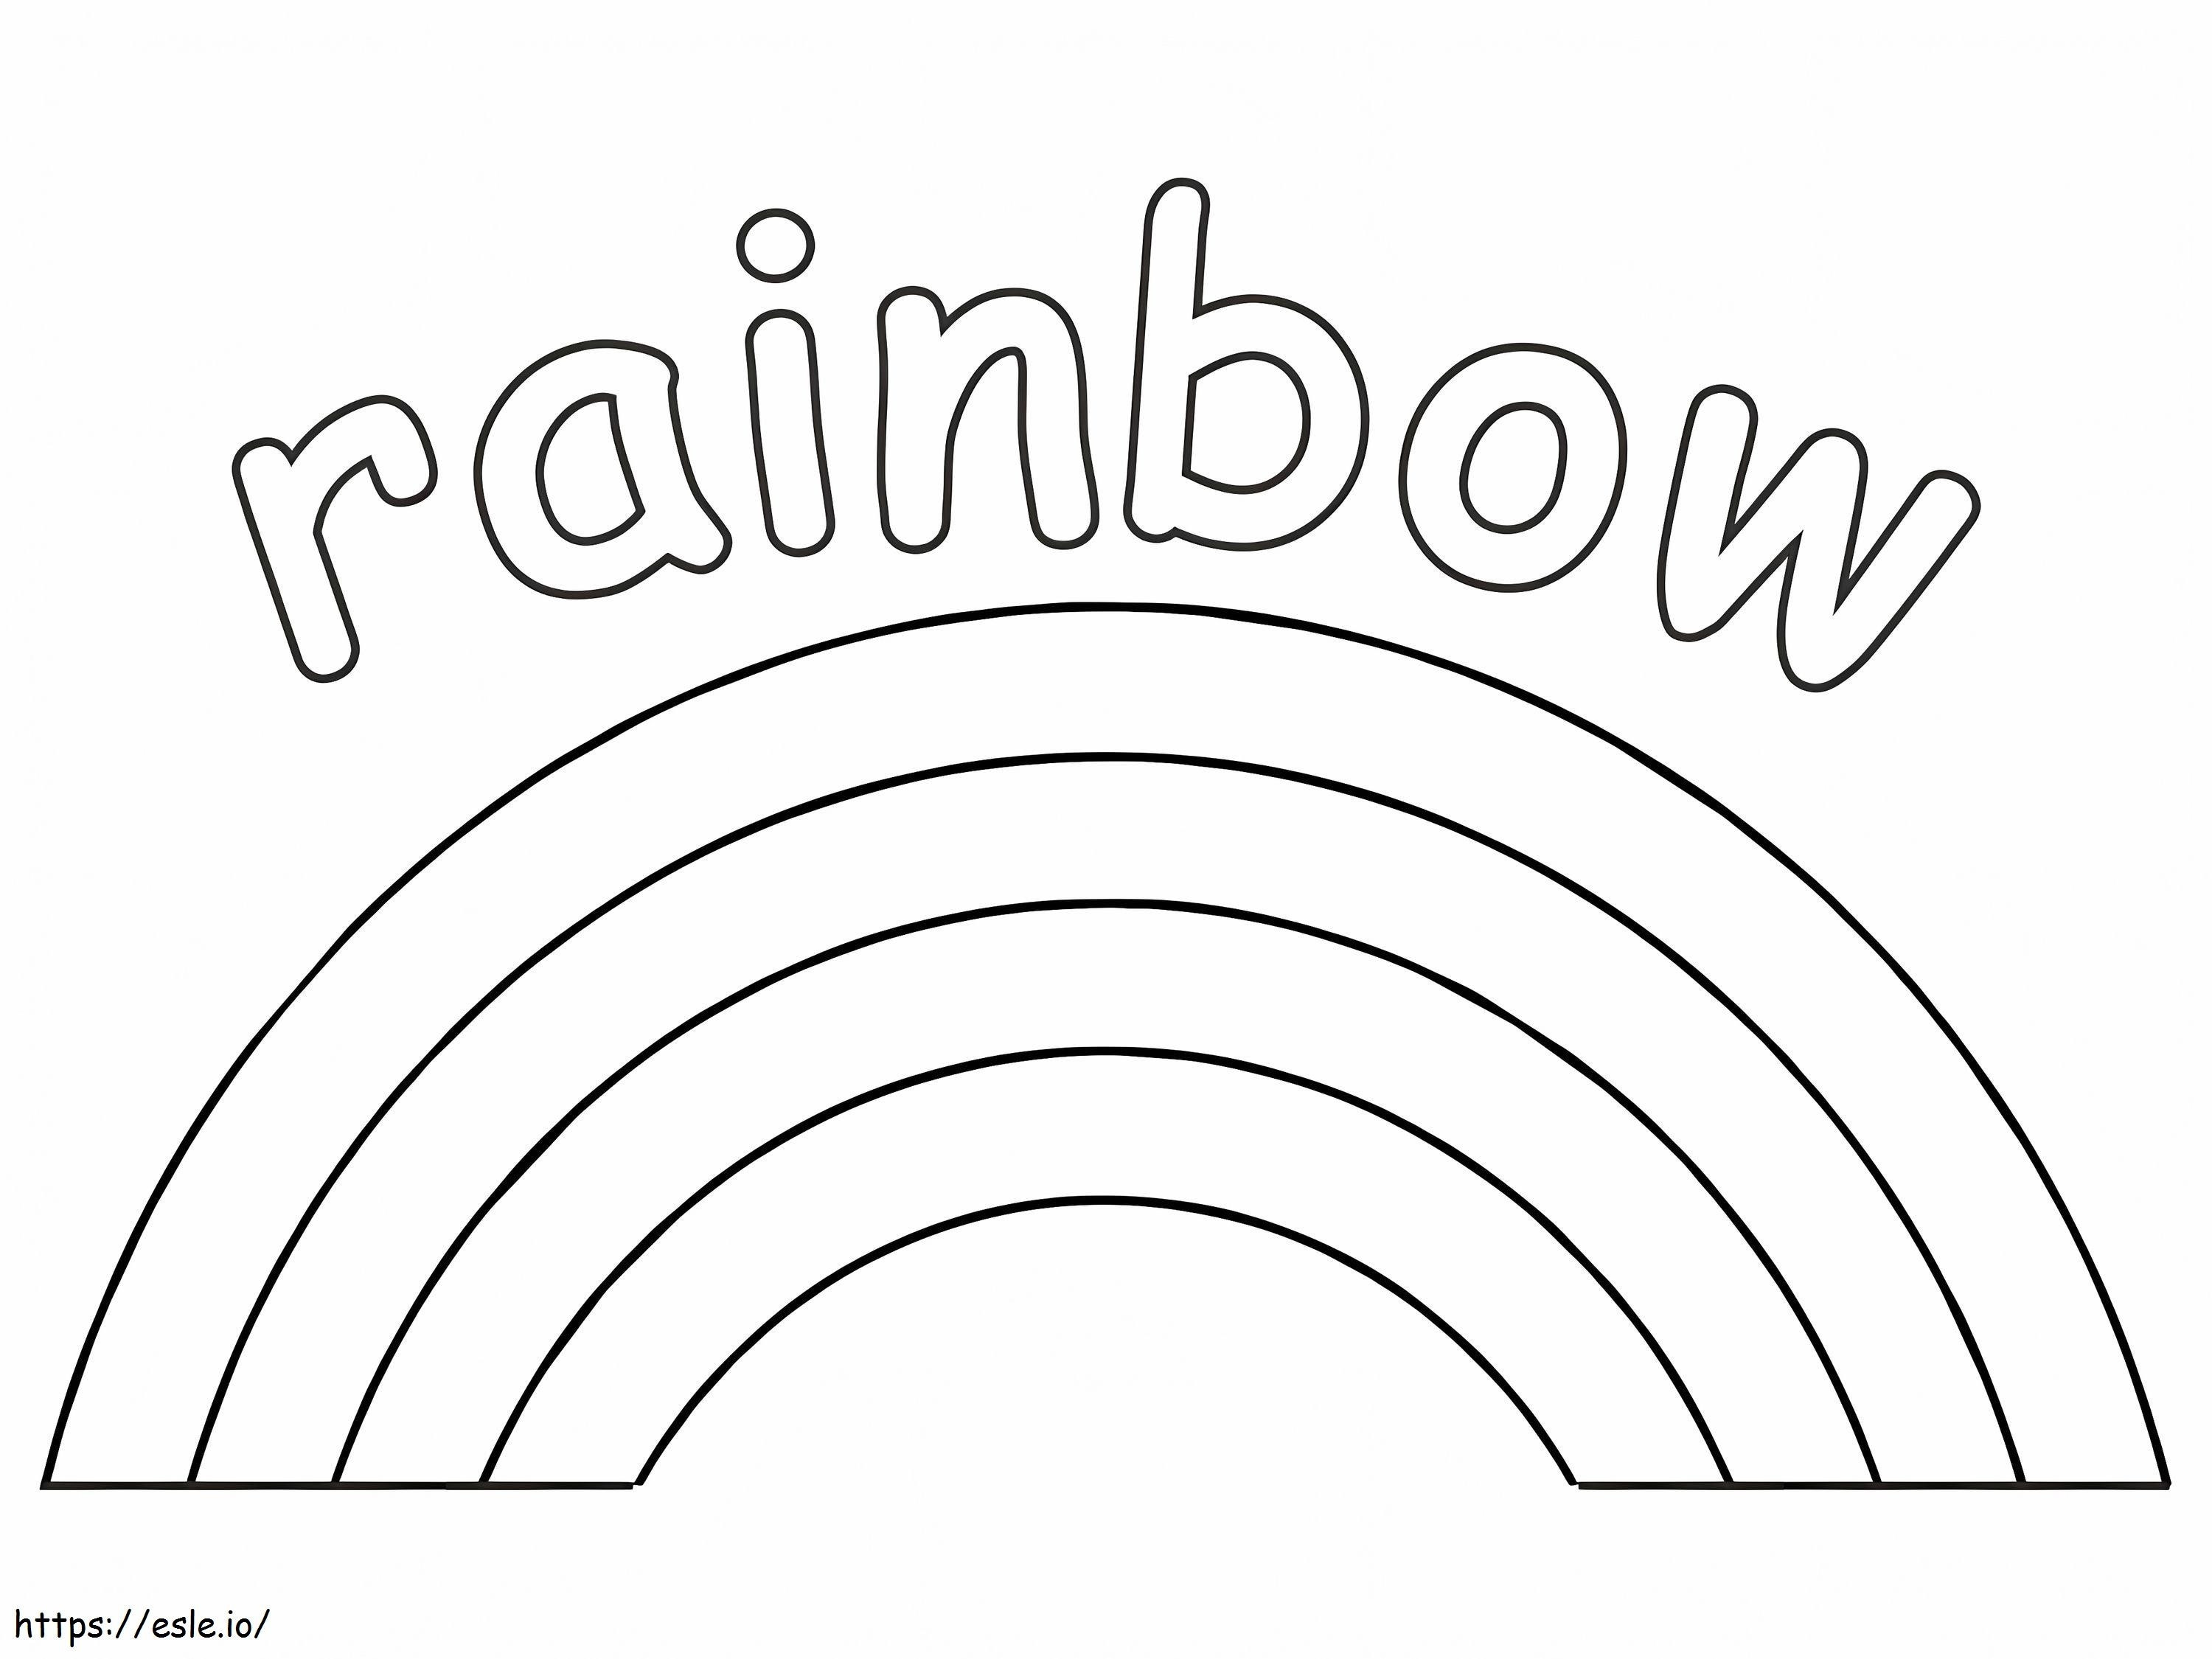 Rainbow 2 coloring page